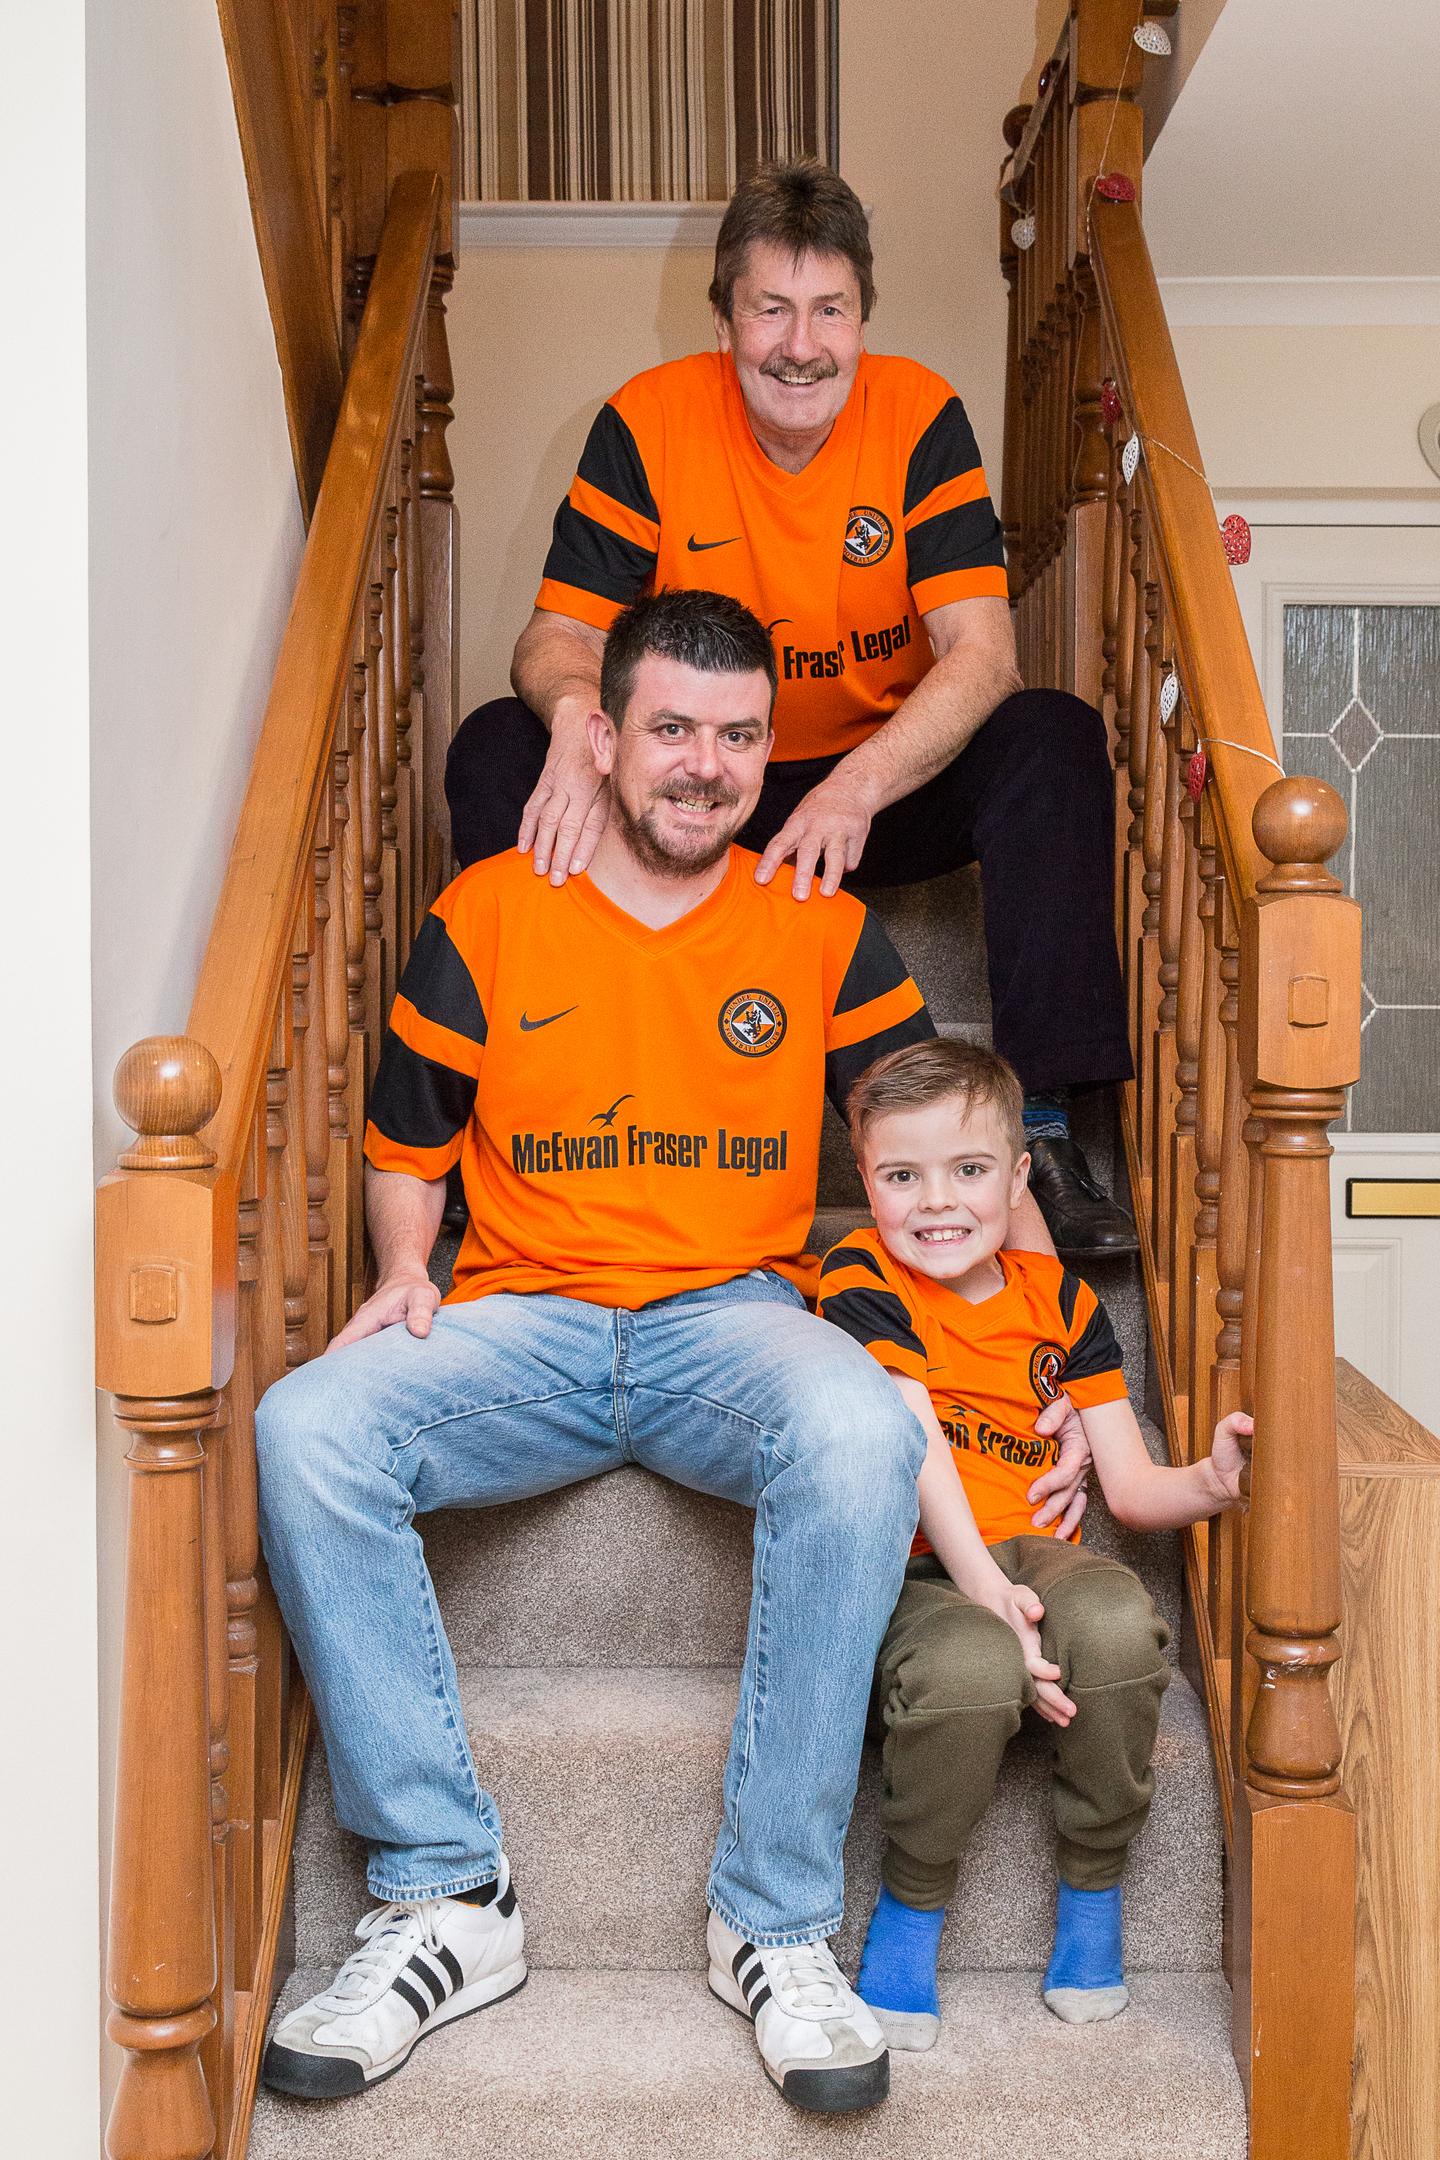 Martin and his son were stunned to find the Tannadice favourite on their doorstep.